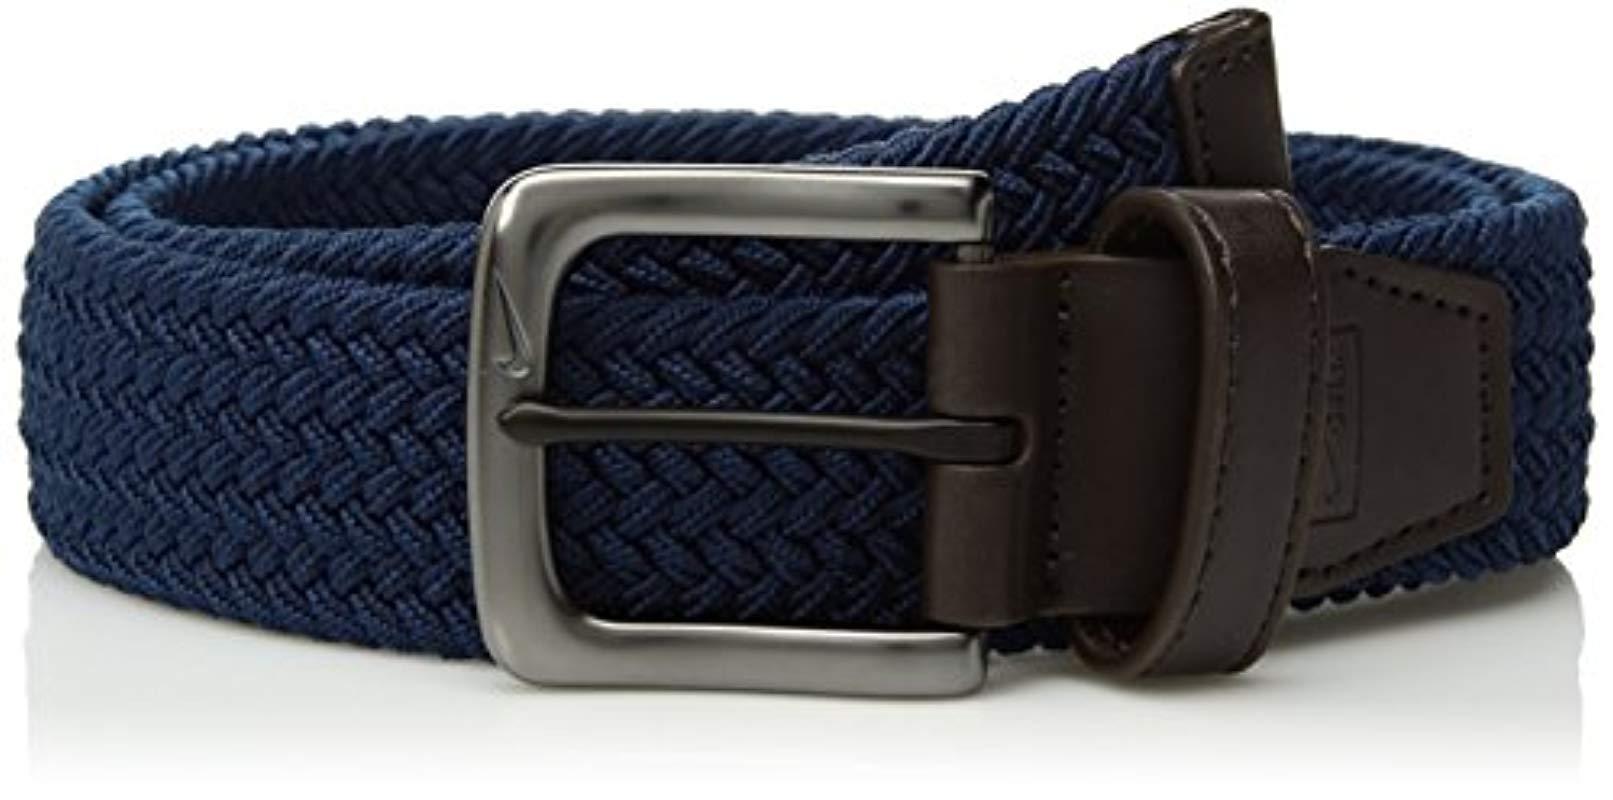 Nike Leather Stretch Woven Belt in Navy Blue (Blue) for Men - Lyst